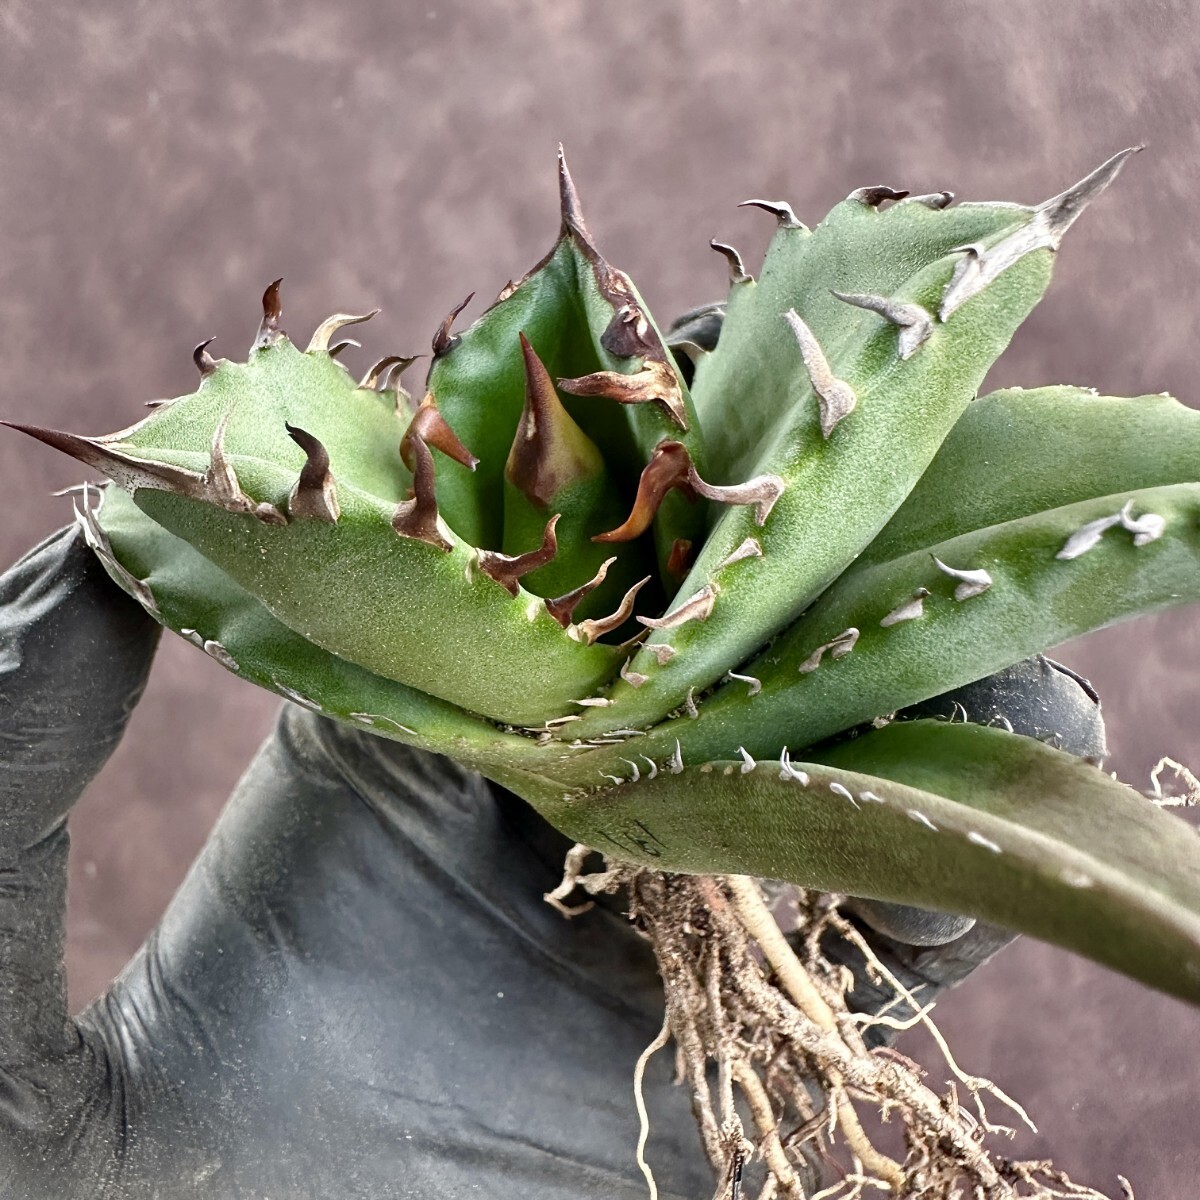 [Lj_plants]W161 agave chitanota cue pido/ wing dragon agave titanota Cupid a little over . carefuly selected finest quality beautiful stock 